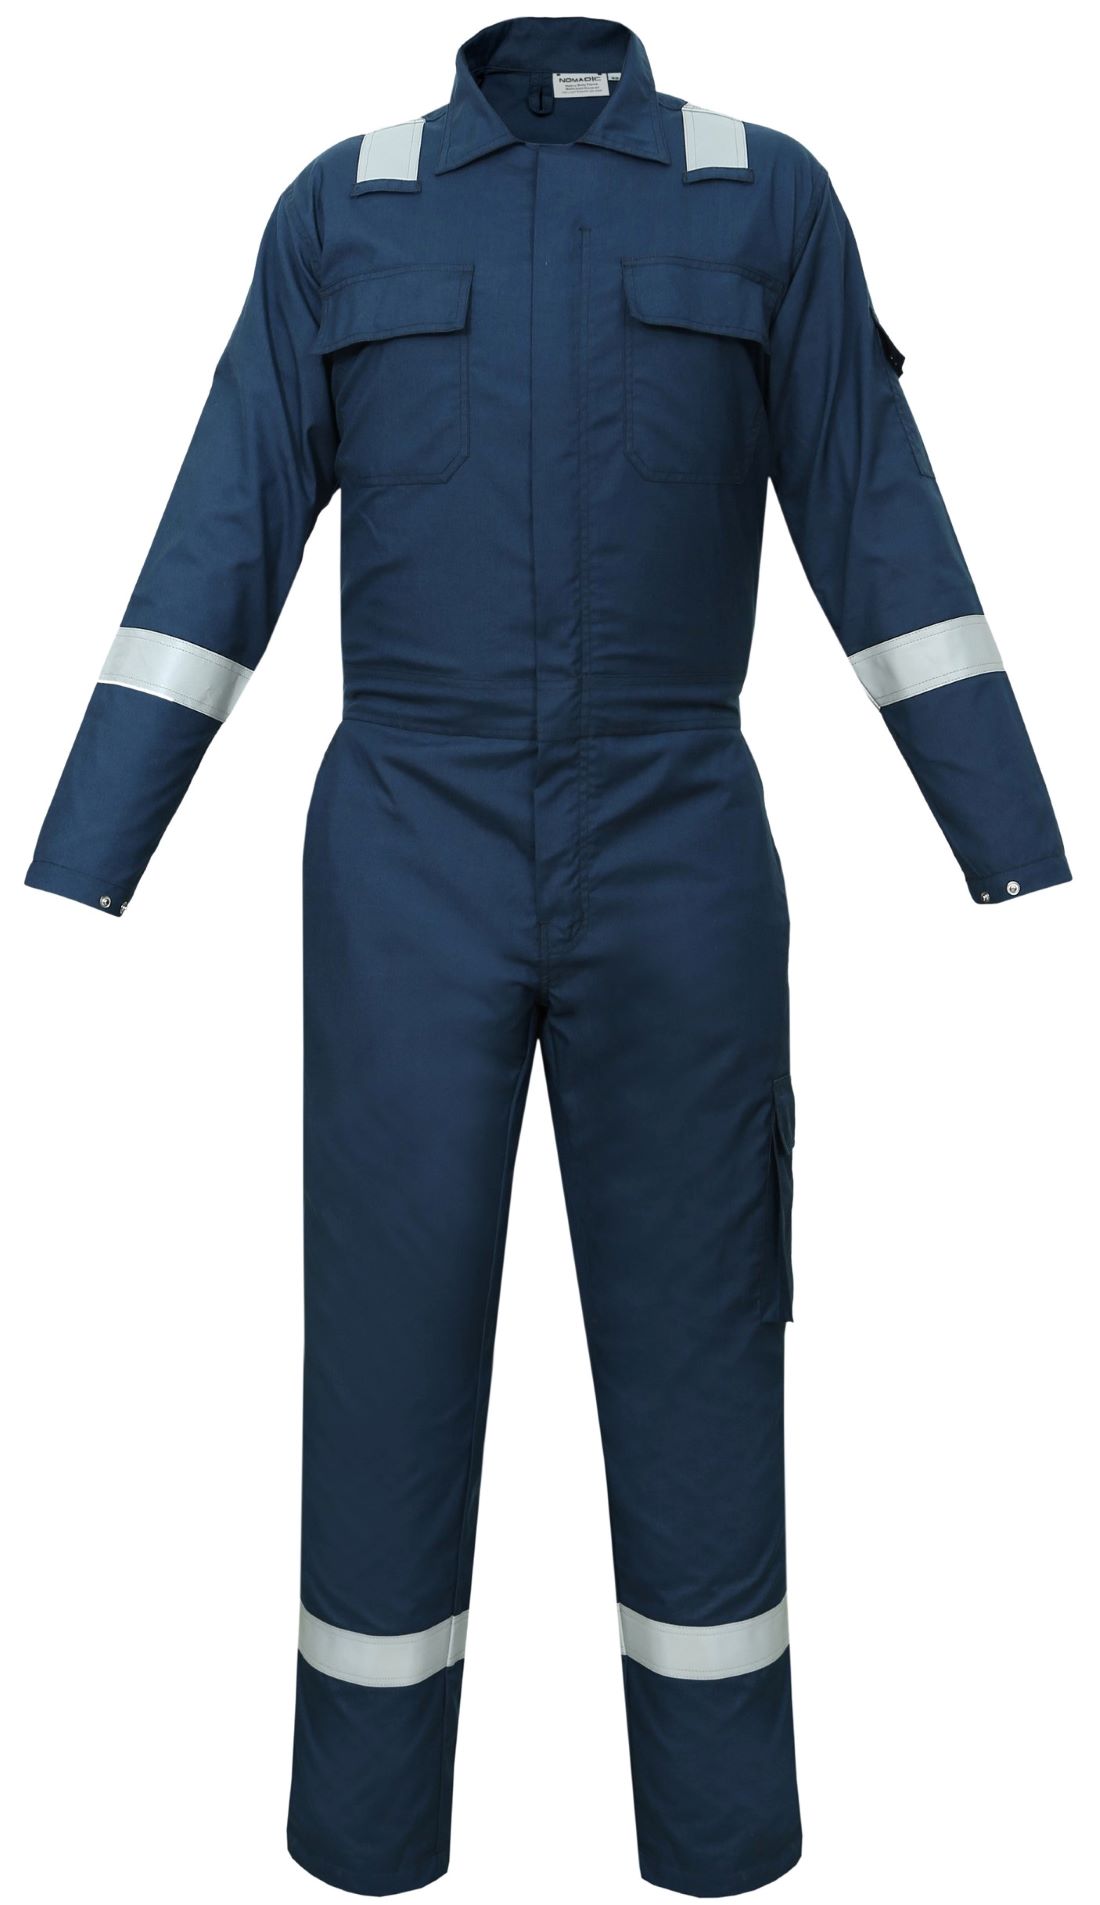 INHERENT FR COOL COVERALL